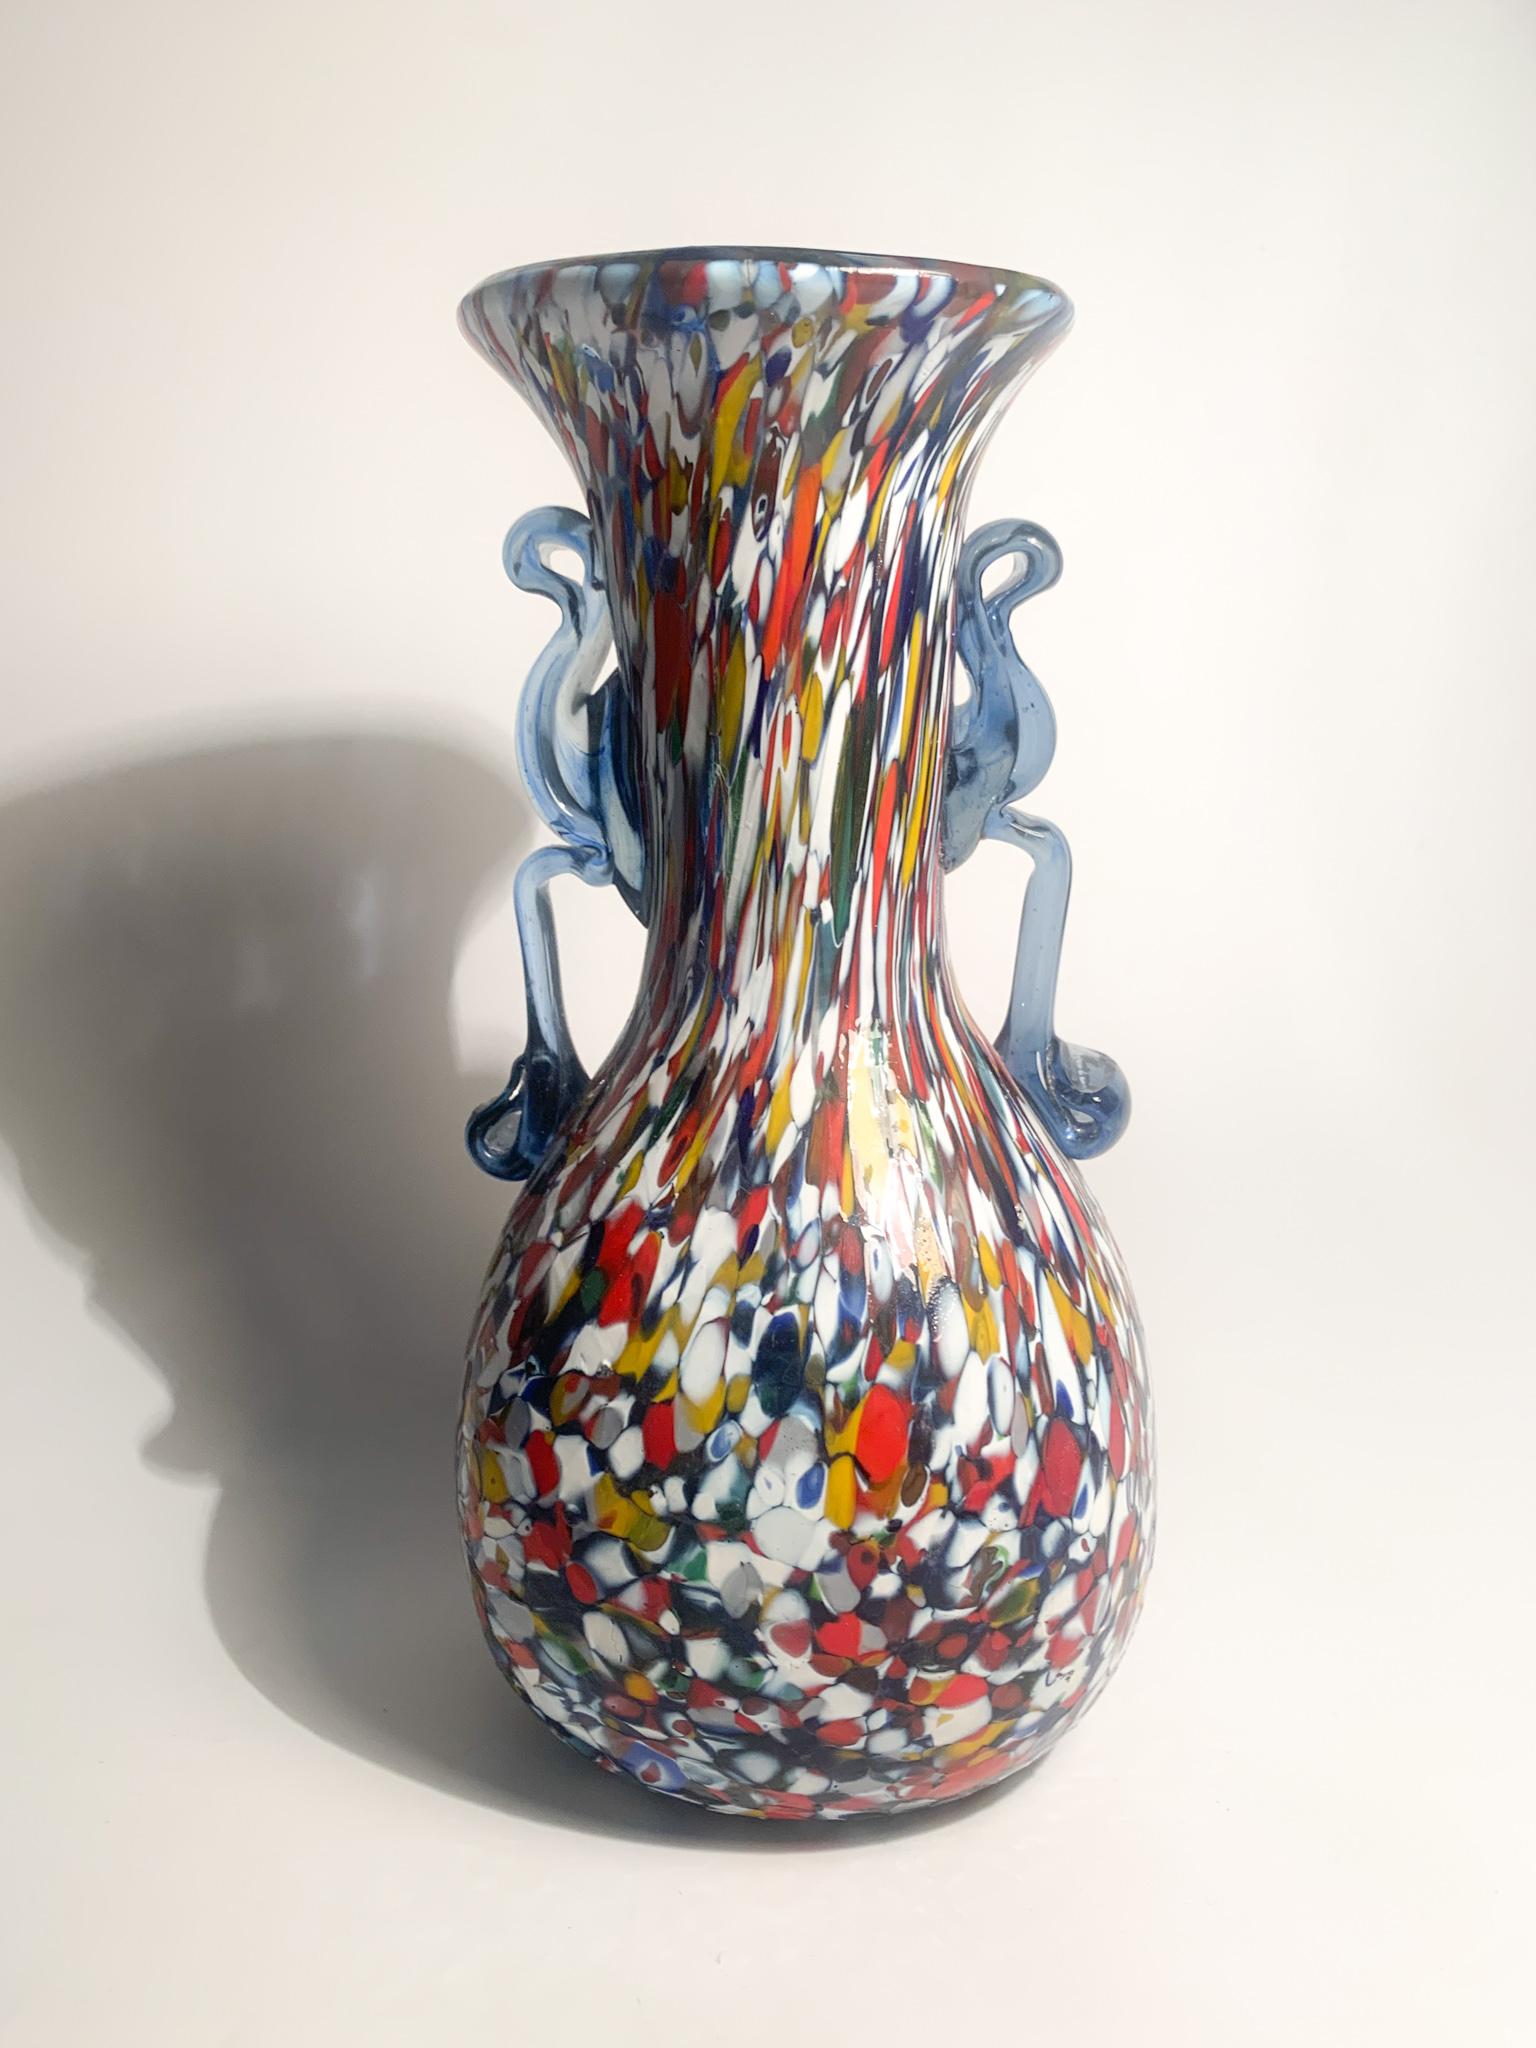 Vase in multicolored Murano glass with handles, hand blown with fusion of moray eels in the 1940s.

Ø cm 10 h cm 22